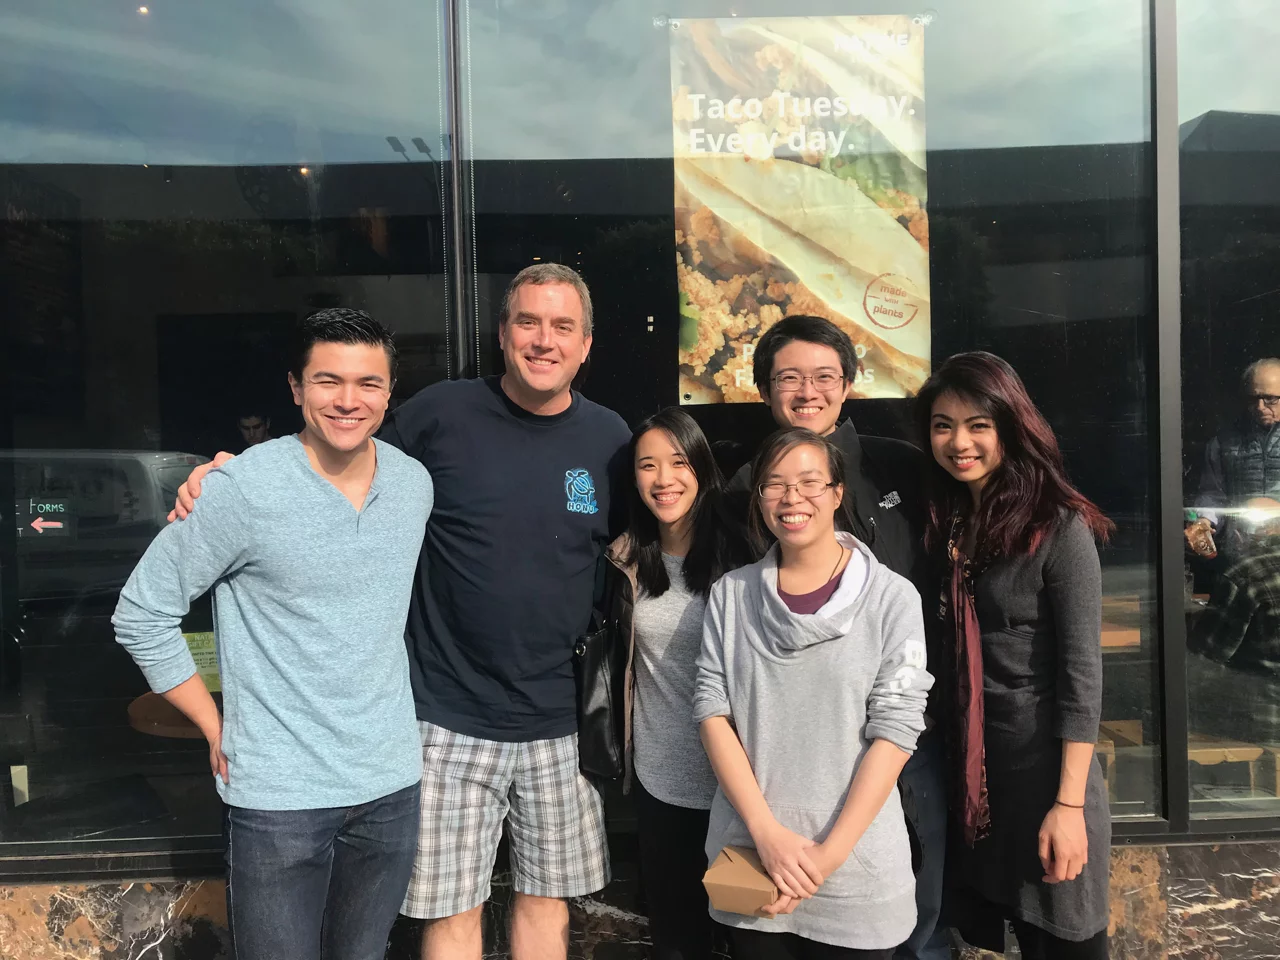 Members of the lab are posing for a photo during a lunch social at a restaurant.